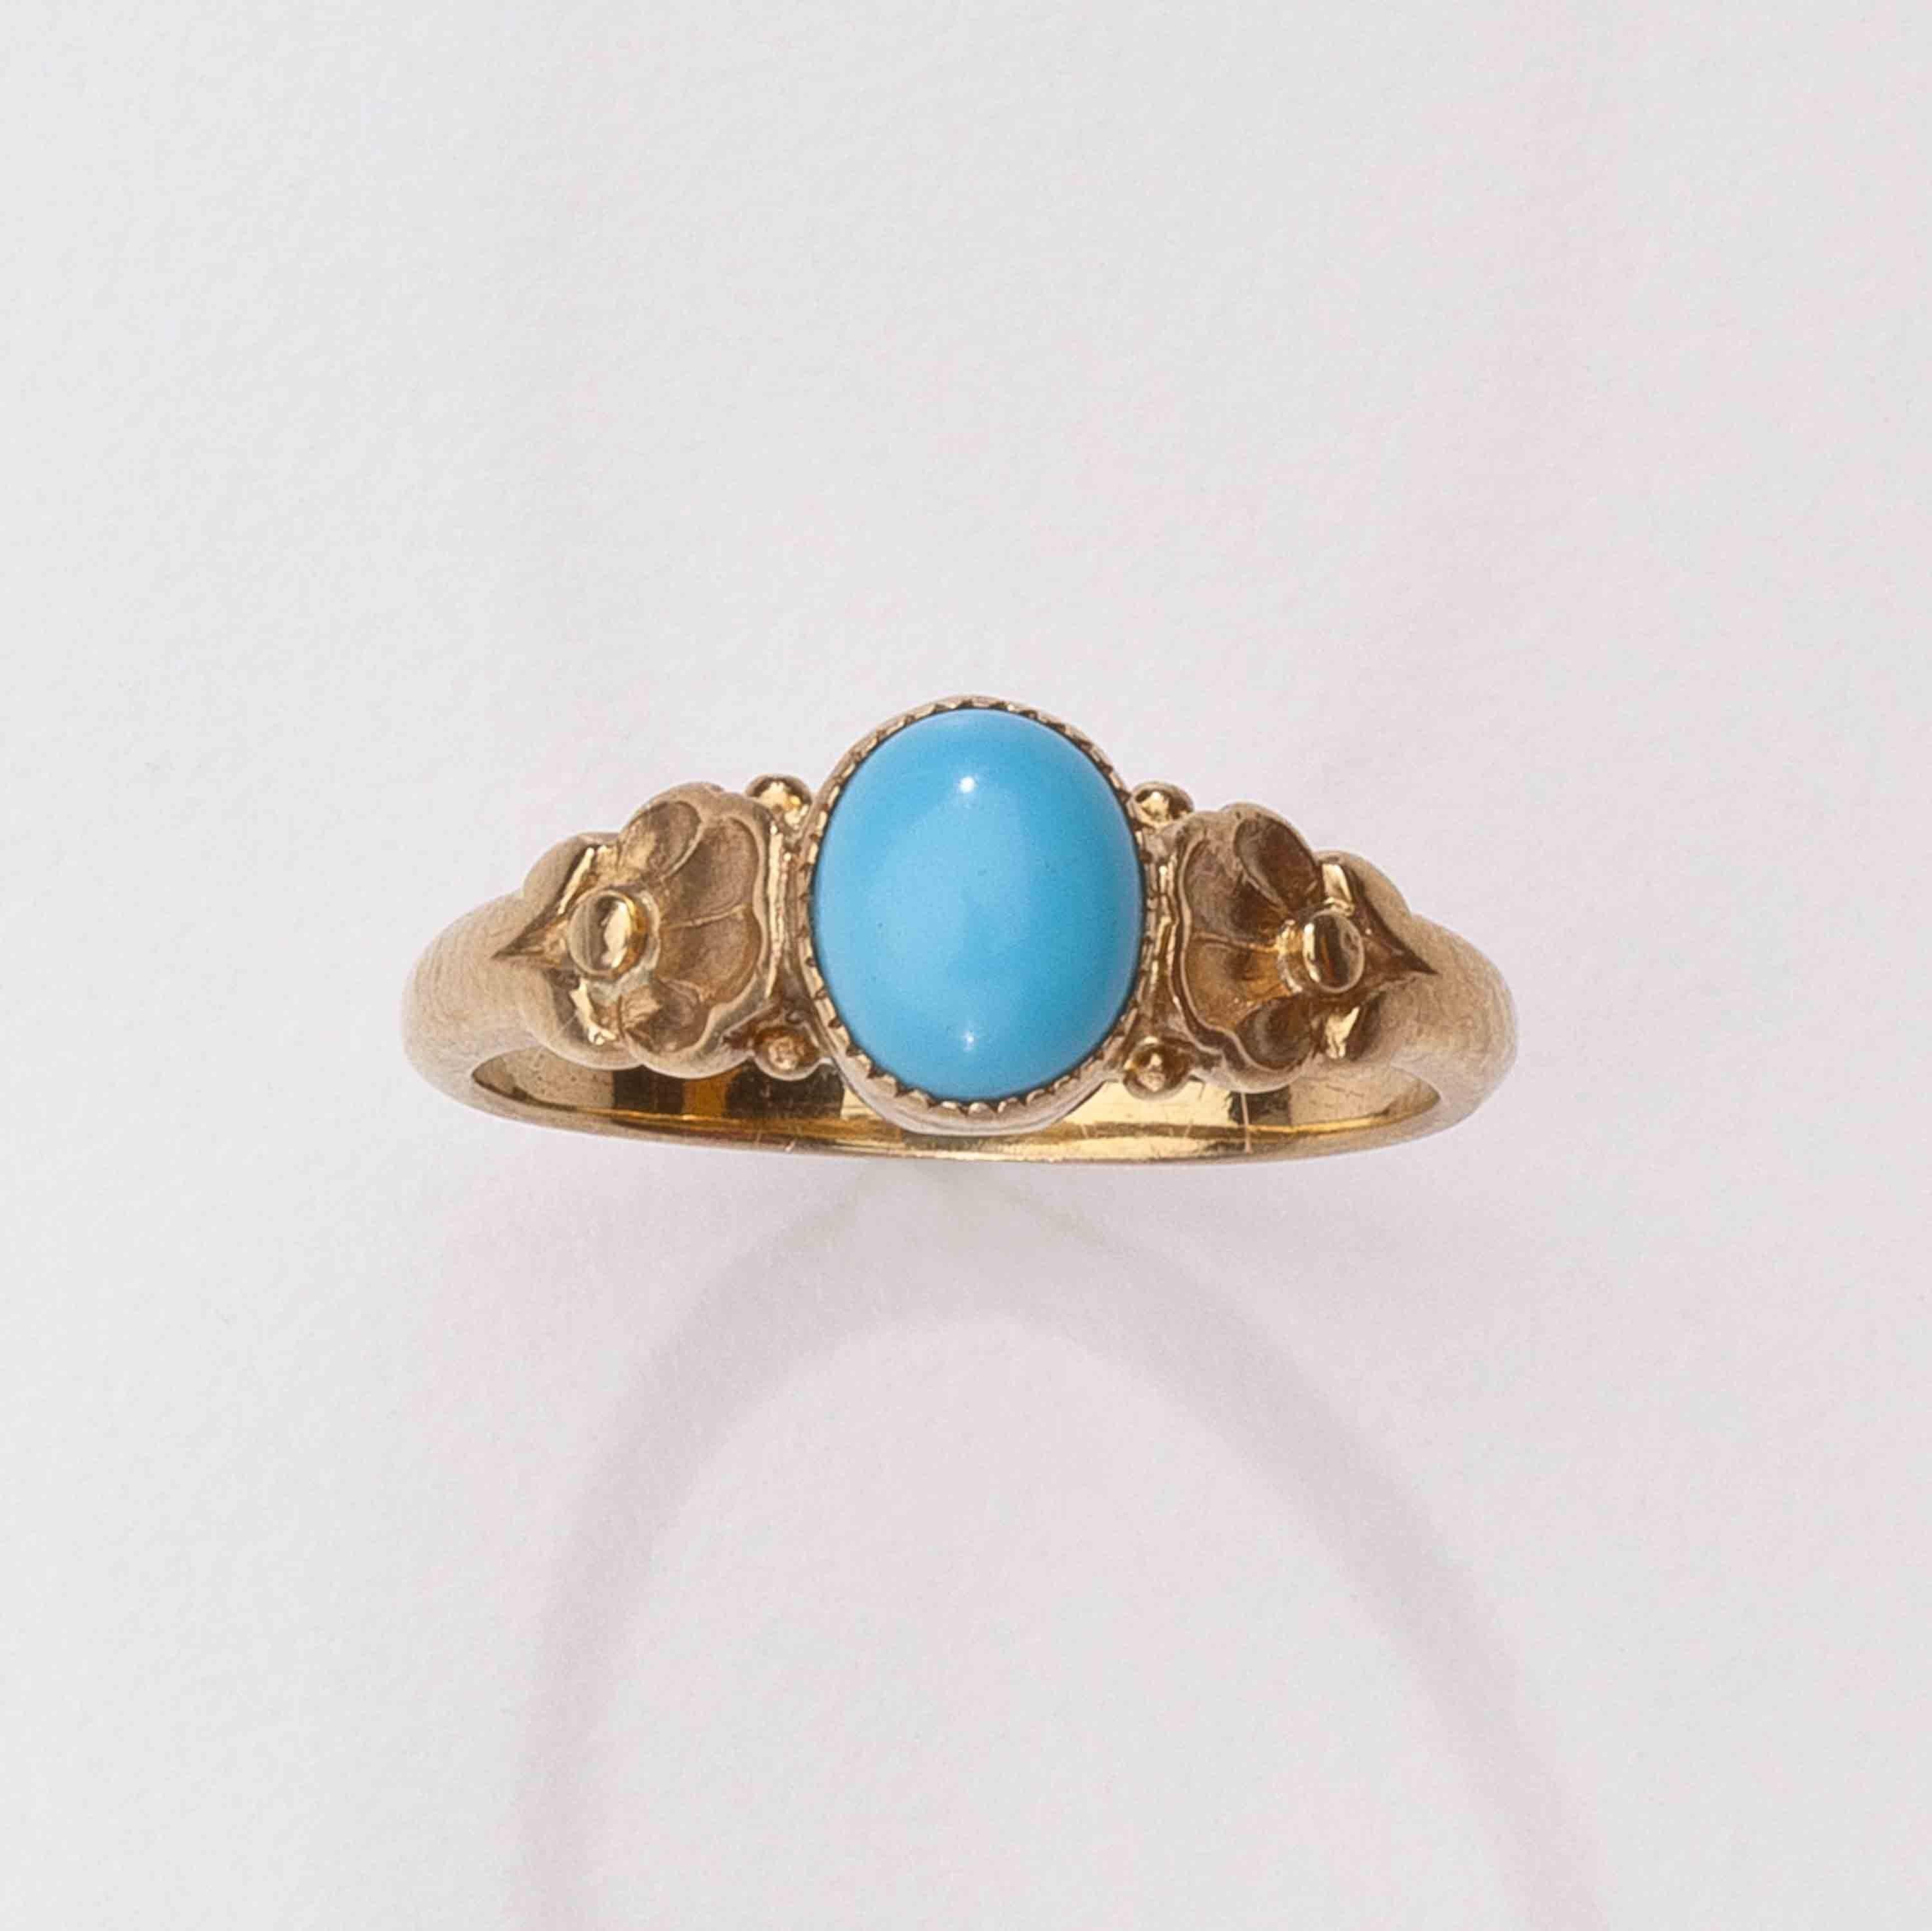 Georg Jensen Gold Ring No. 175 with Turquoise.  This ring is in 18 karat yellow gold and is set with a cabochon turquoise.  The ring bears impressed company marks for Georg Jensen, 765, 18K.  The ring is size 7 (can be resized).  The ring is in